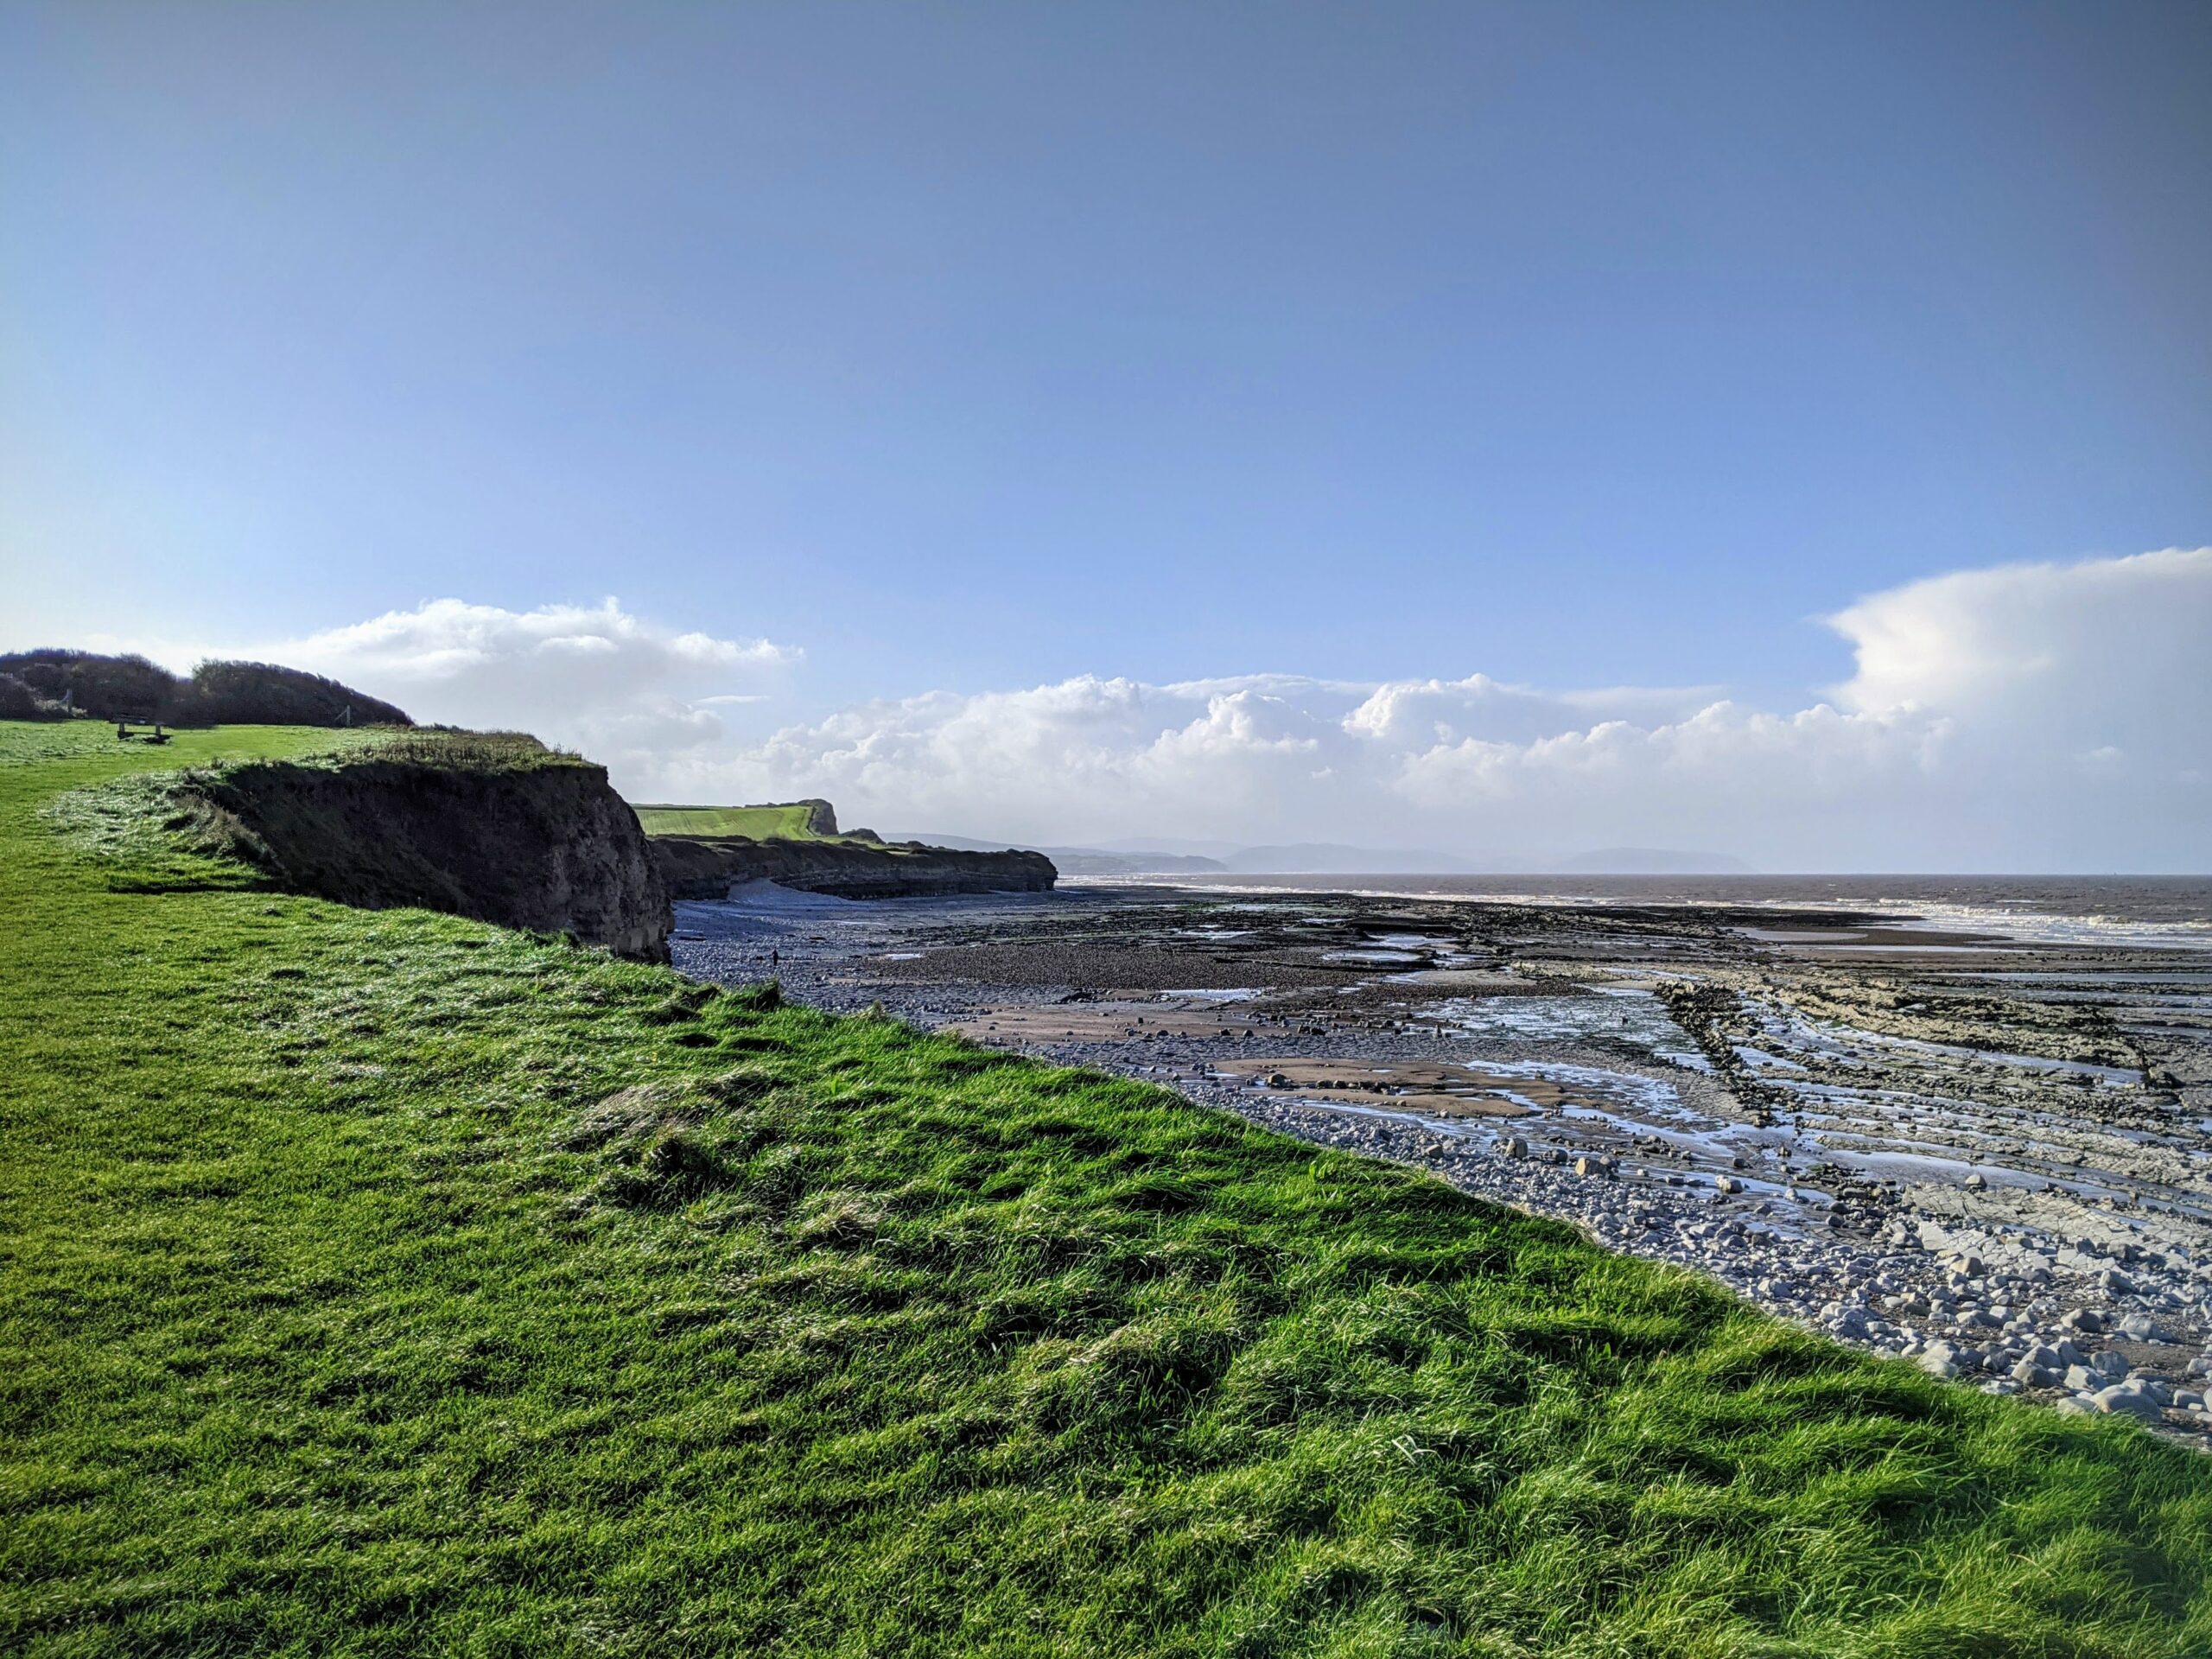 Beautiful Somerset Coast surprises visitors with lush green scenery and rugged cliffs.